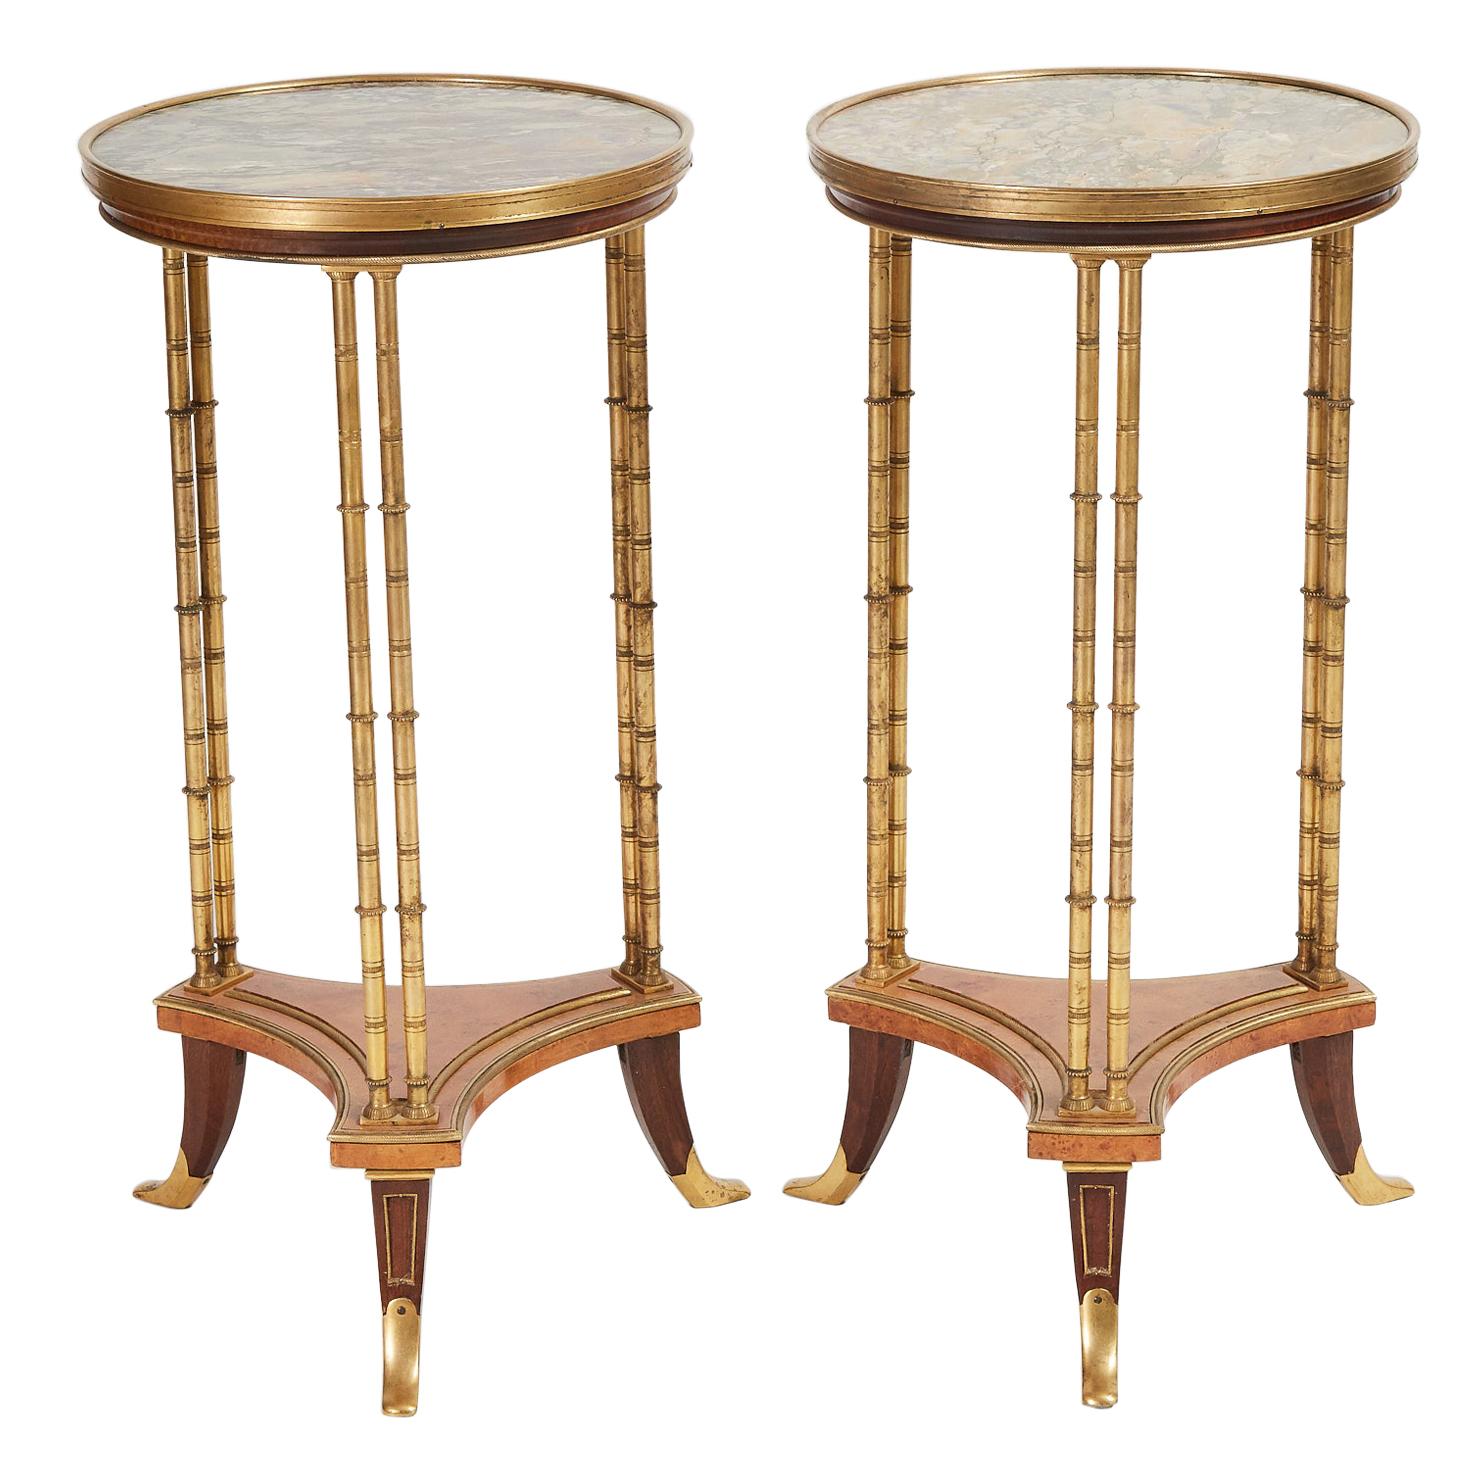 Pair of Early 20th Century French Gueridon Tables in the style of Weisweiler